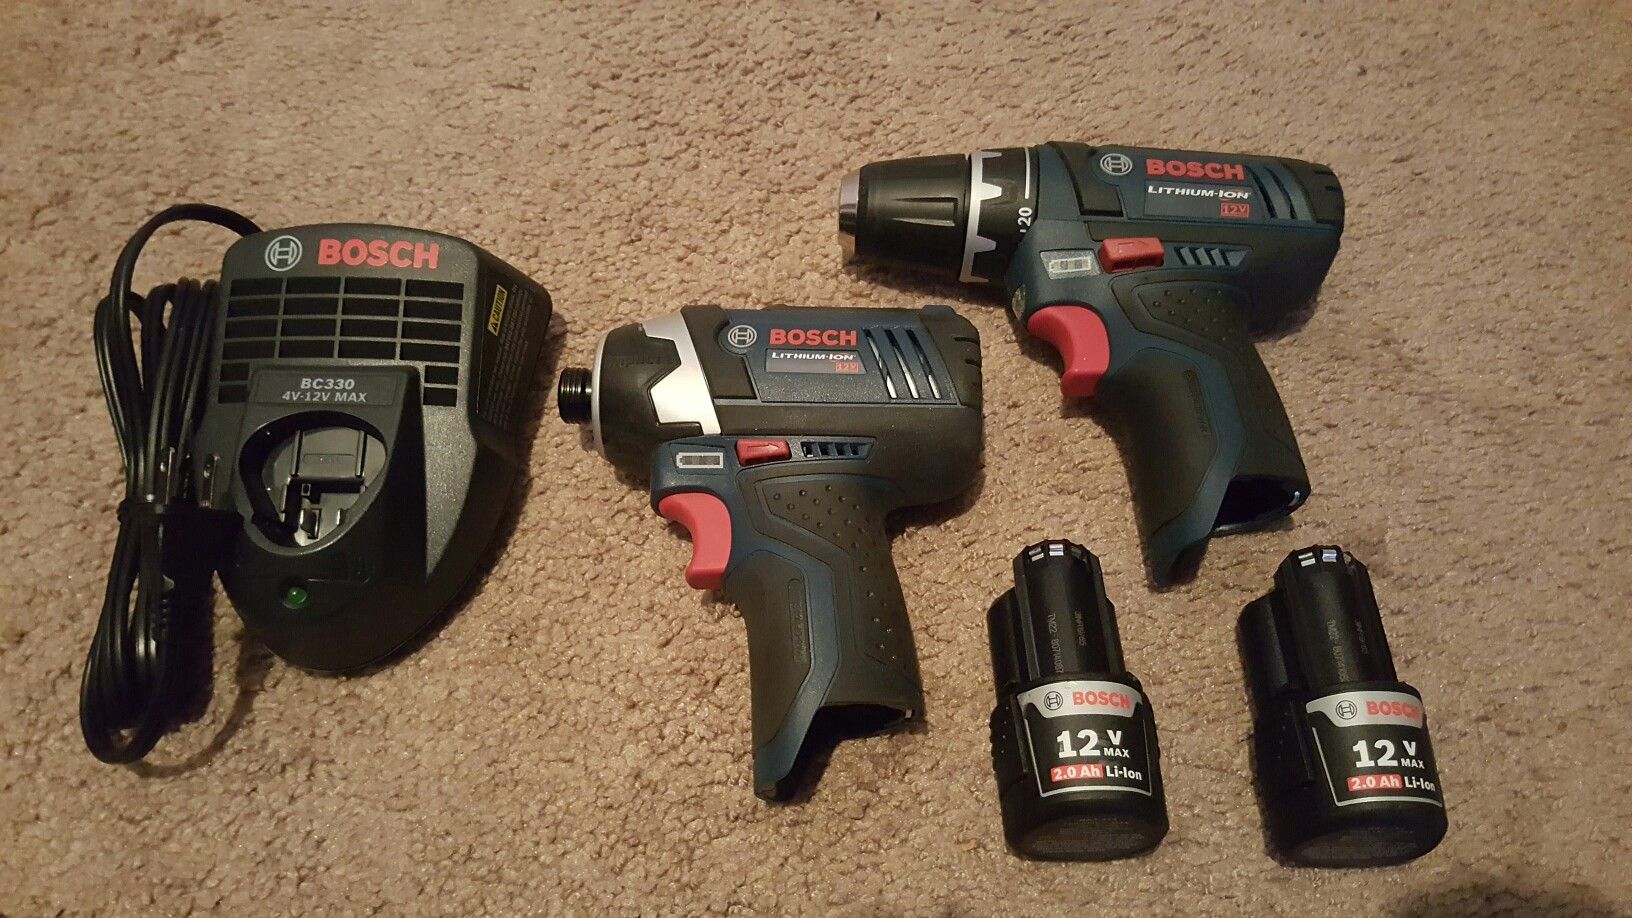 Bosch 12v drill+impact+2 batteries+carry case